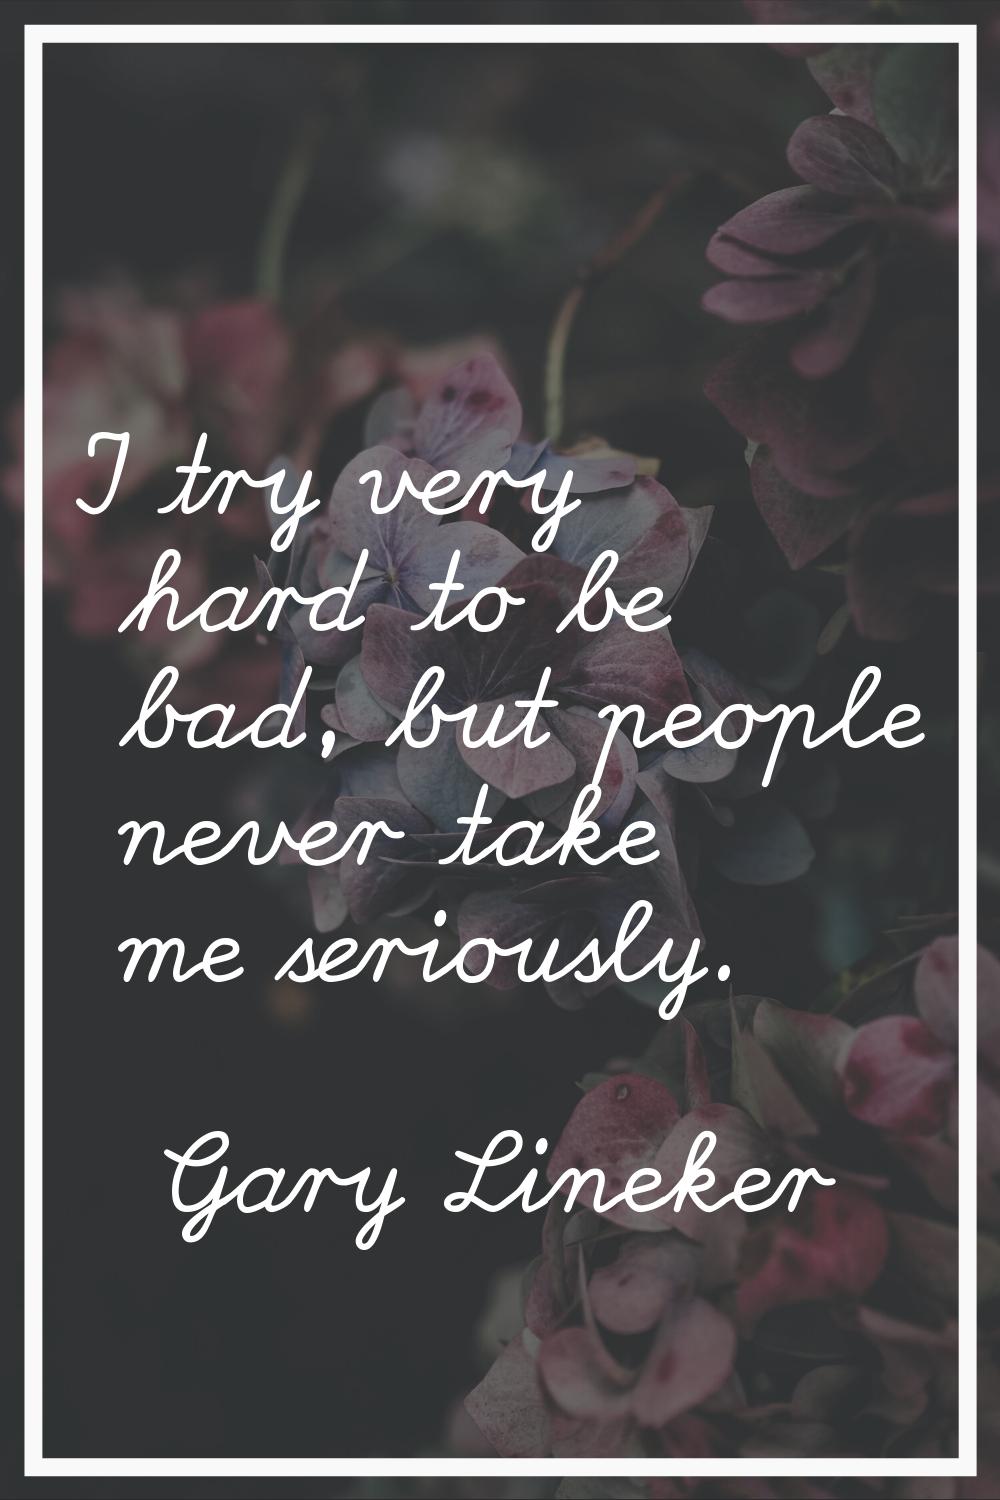 I try very hard to be bad, but people never take me seriously.